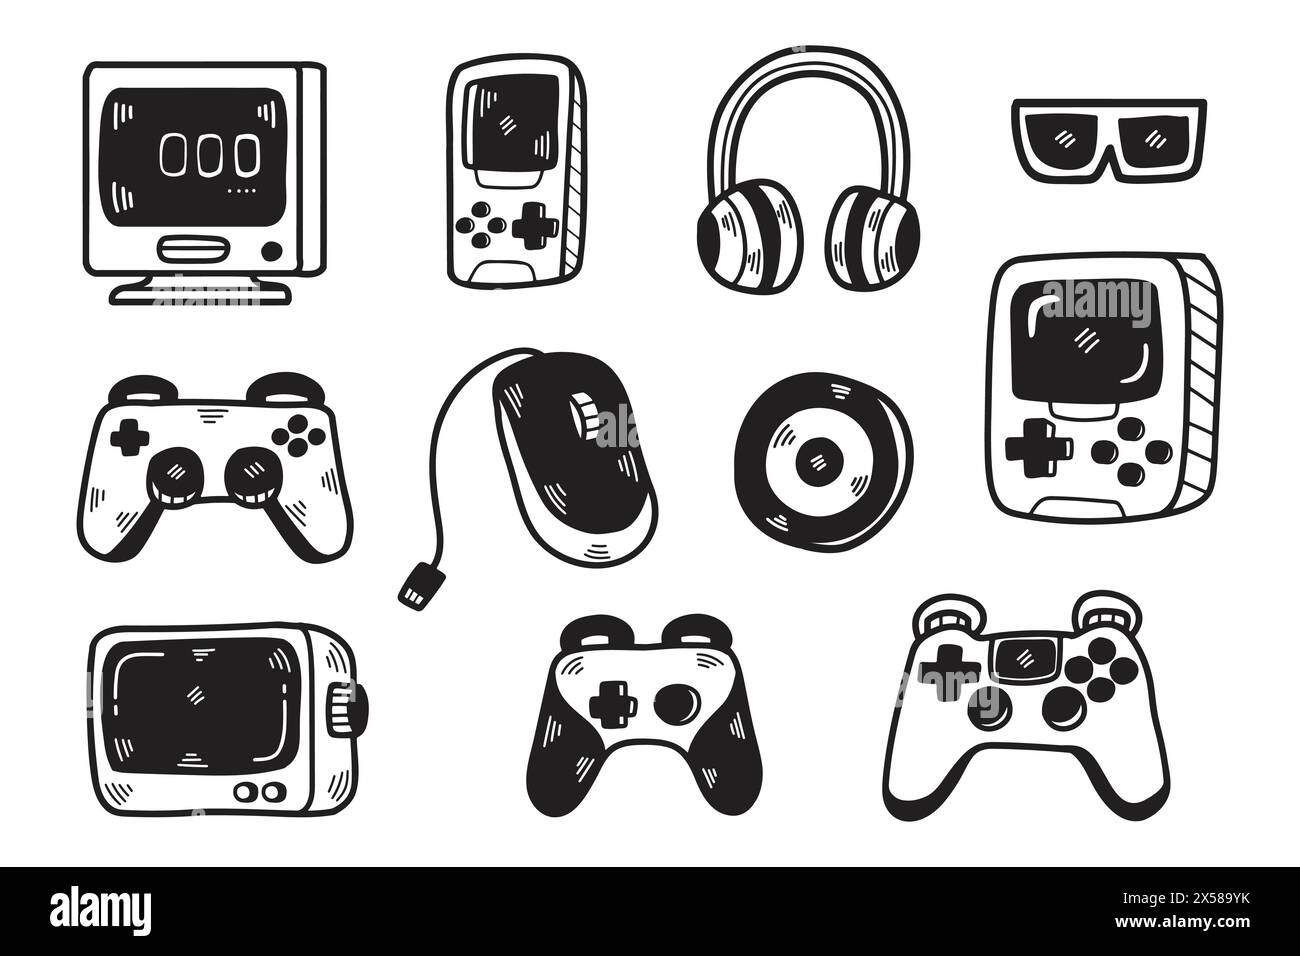 A collection of video game controllers and accessories. The controllers include a Wii remote, a Nintendo GameCube controller, and a Nintendo Wii Nunch Stock Vector